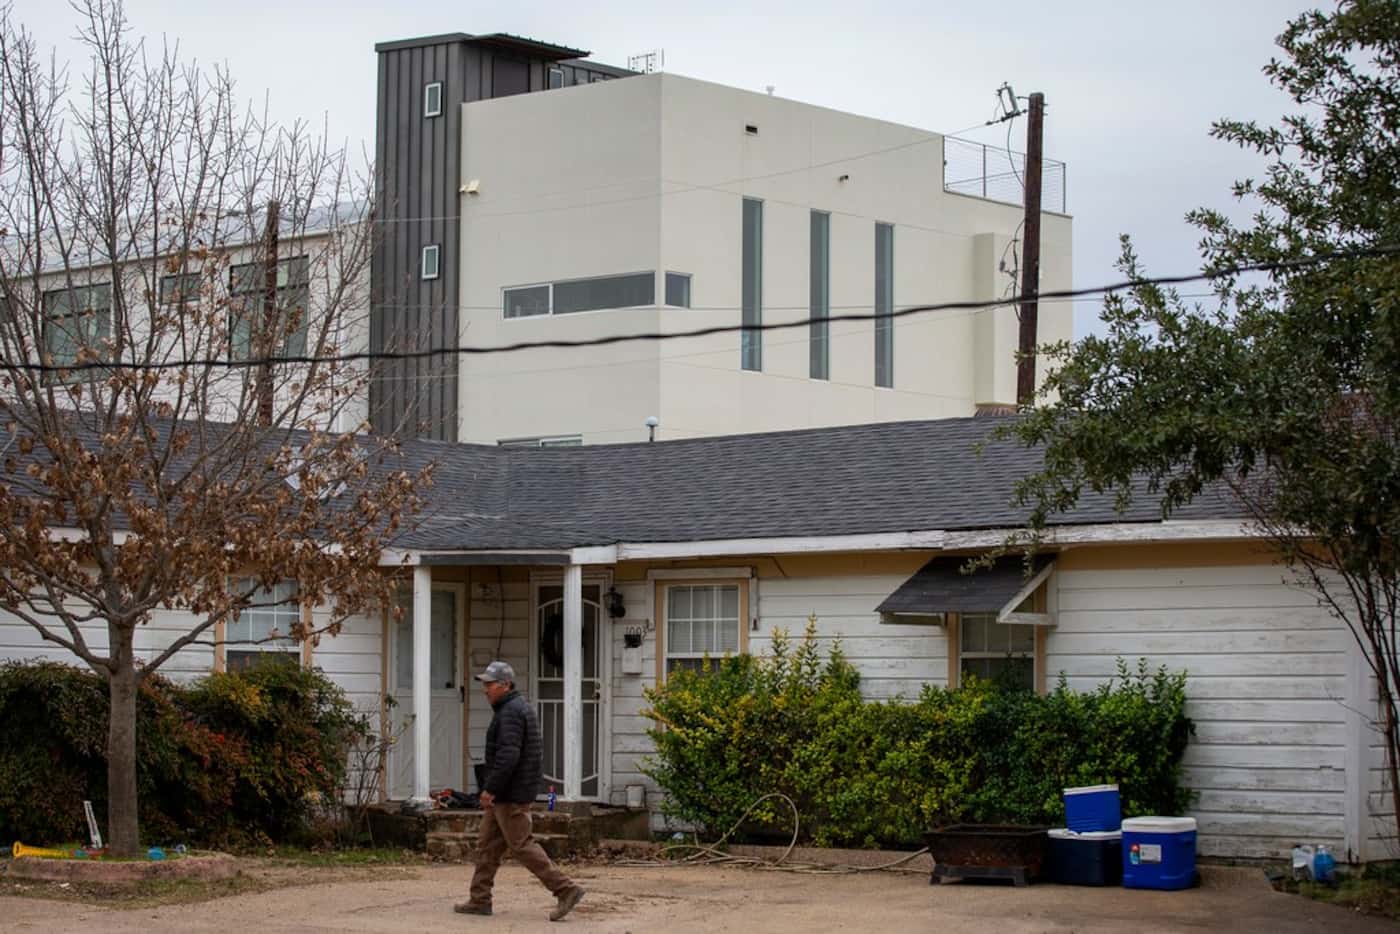 New construction rises over his home as Jose Morin walks between buildings on his property...